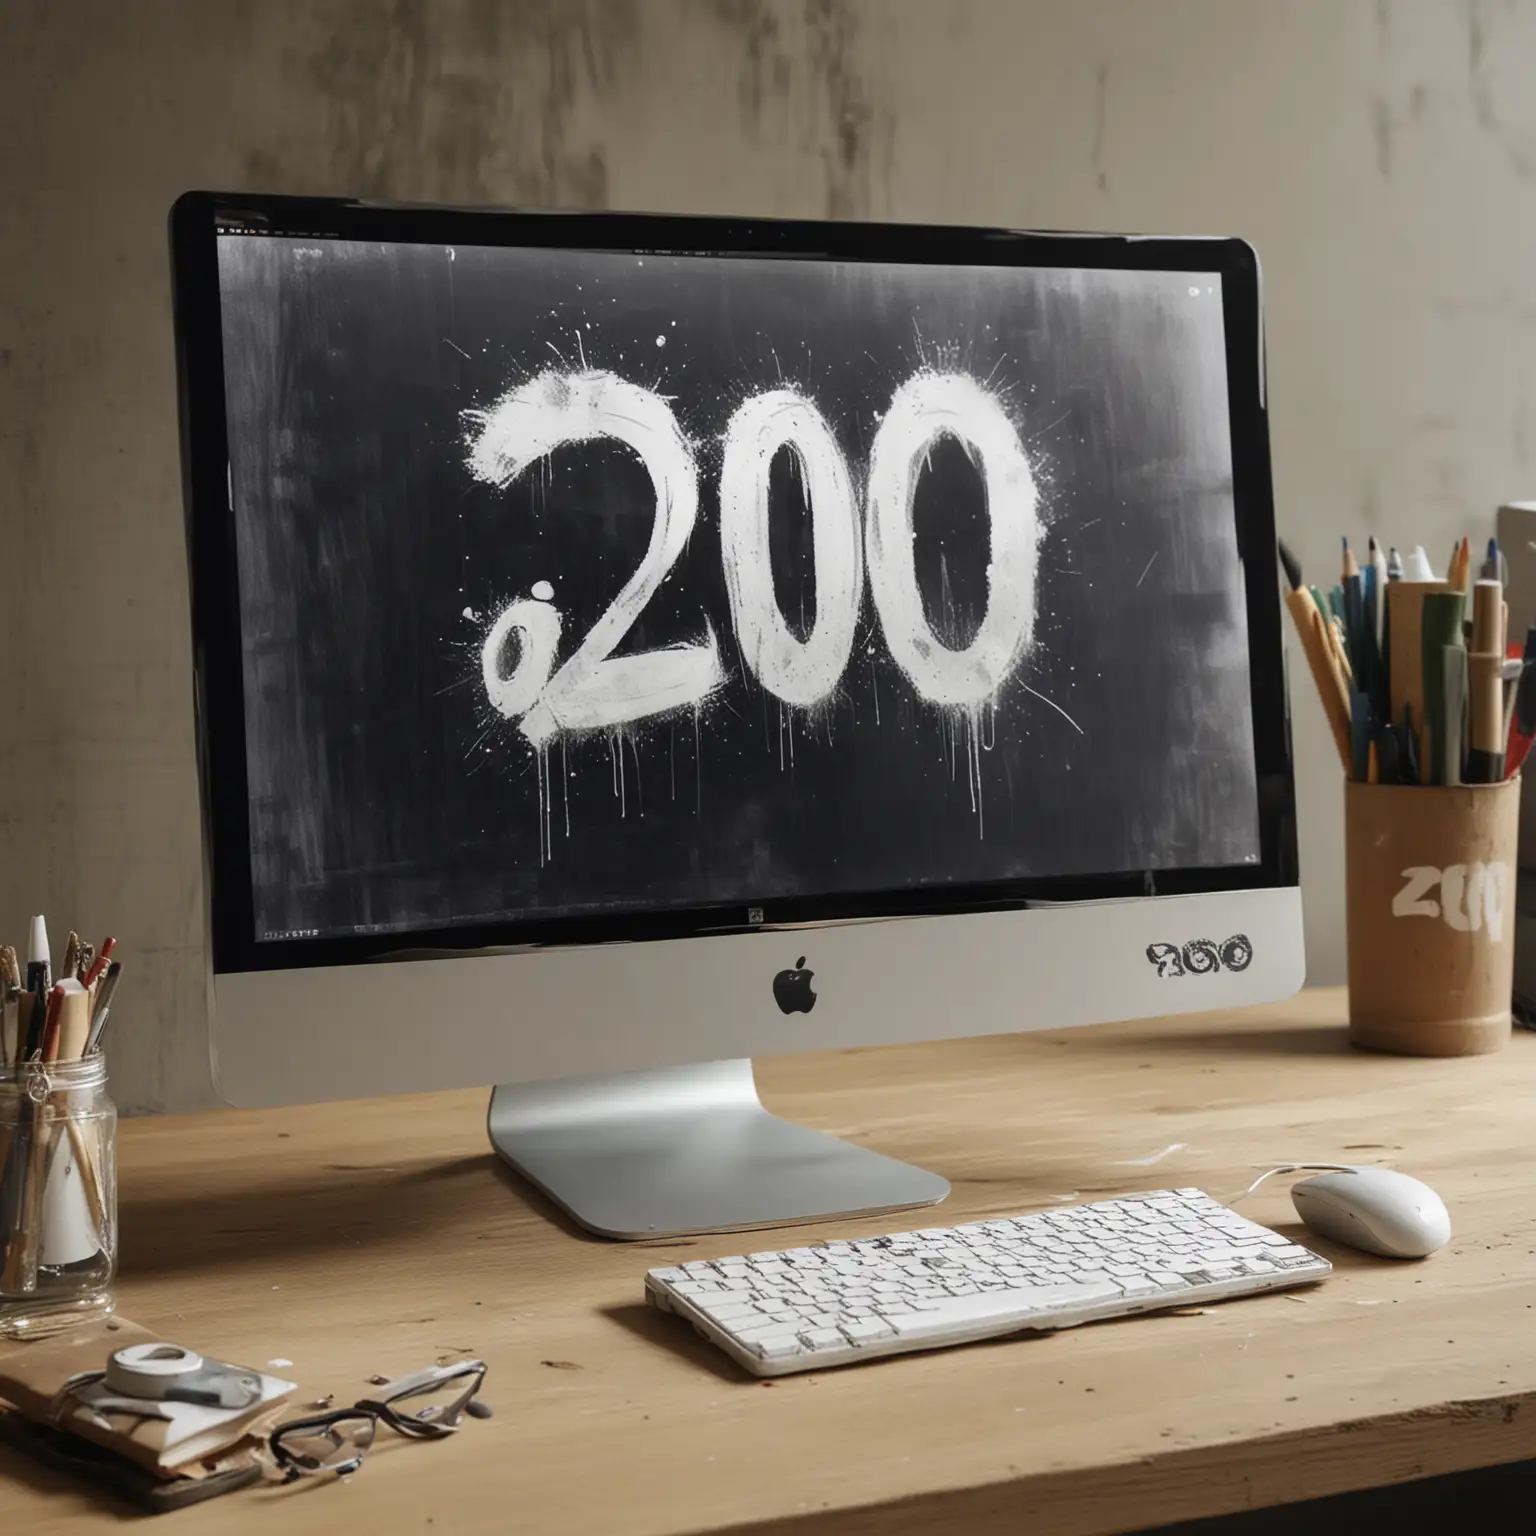 Designers Computer Screen with 2000 Spray Painted Symbolizing Creative Excellence